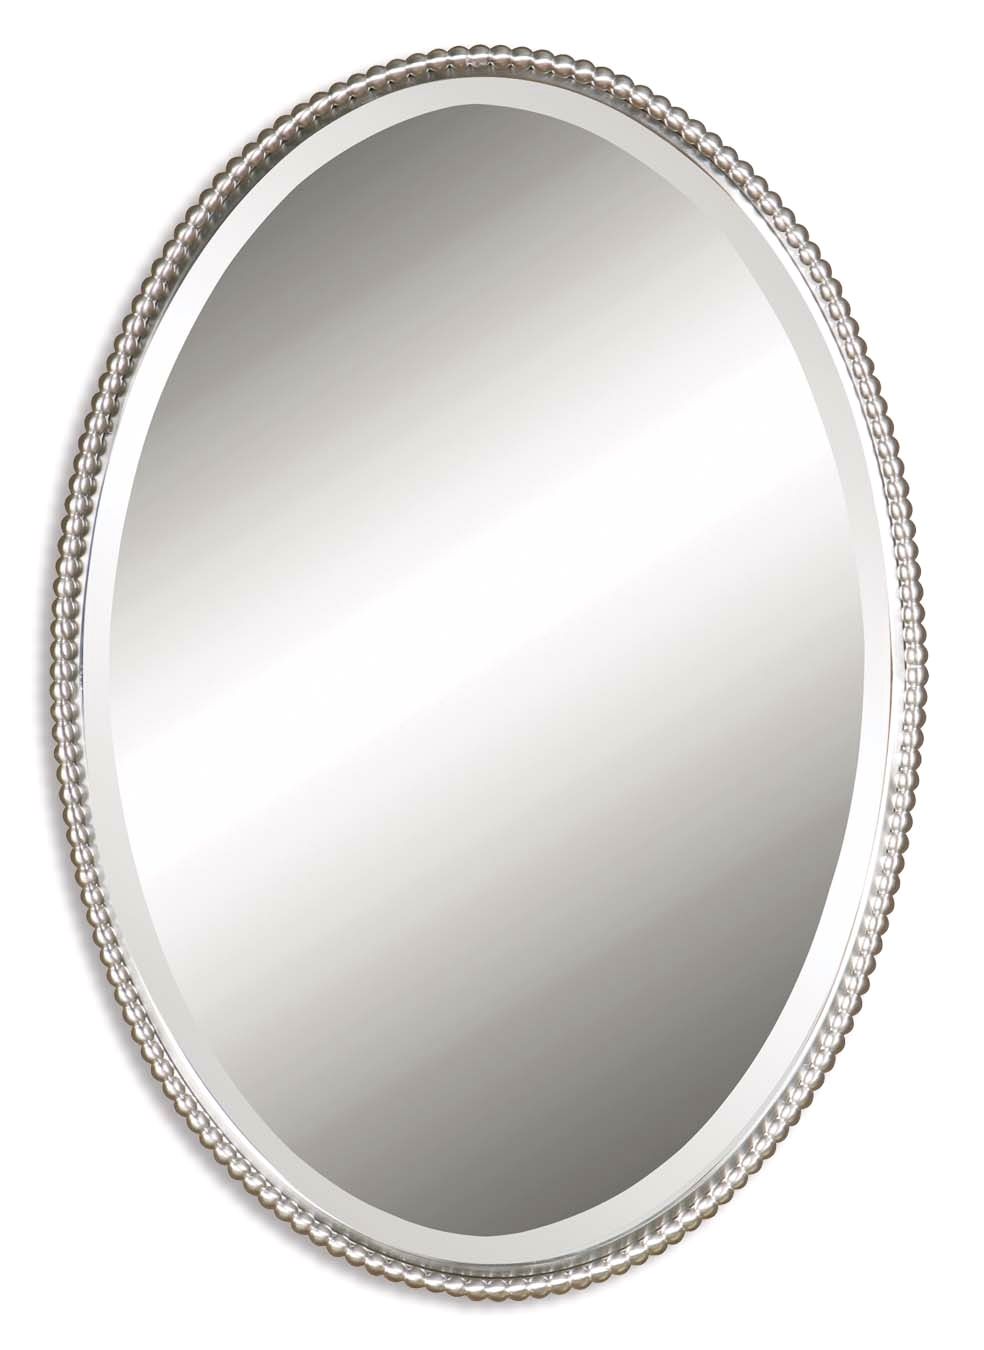 Sherise Modern Brushed Nickel Oval Mirror 01102 B Throughout Nickel Floating Wall Mirrors (View 10 of 15)